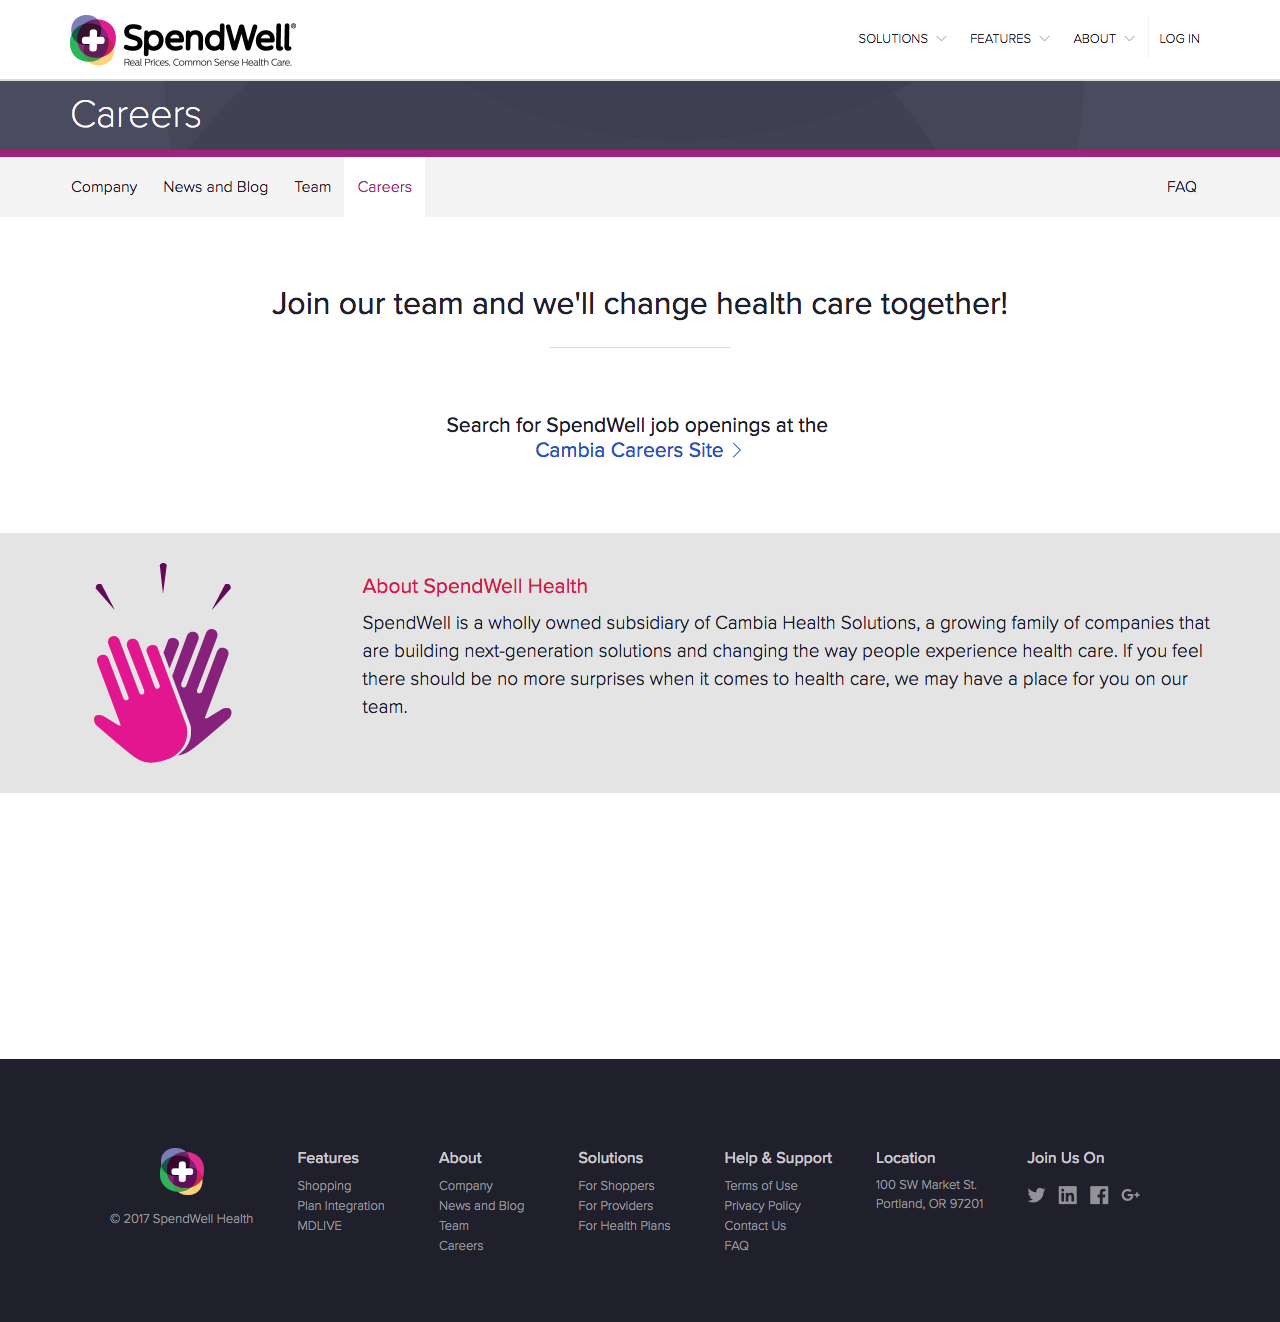 SpendWell Health site FAQ page: Shoppers